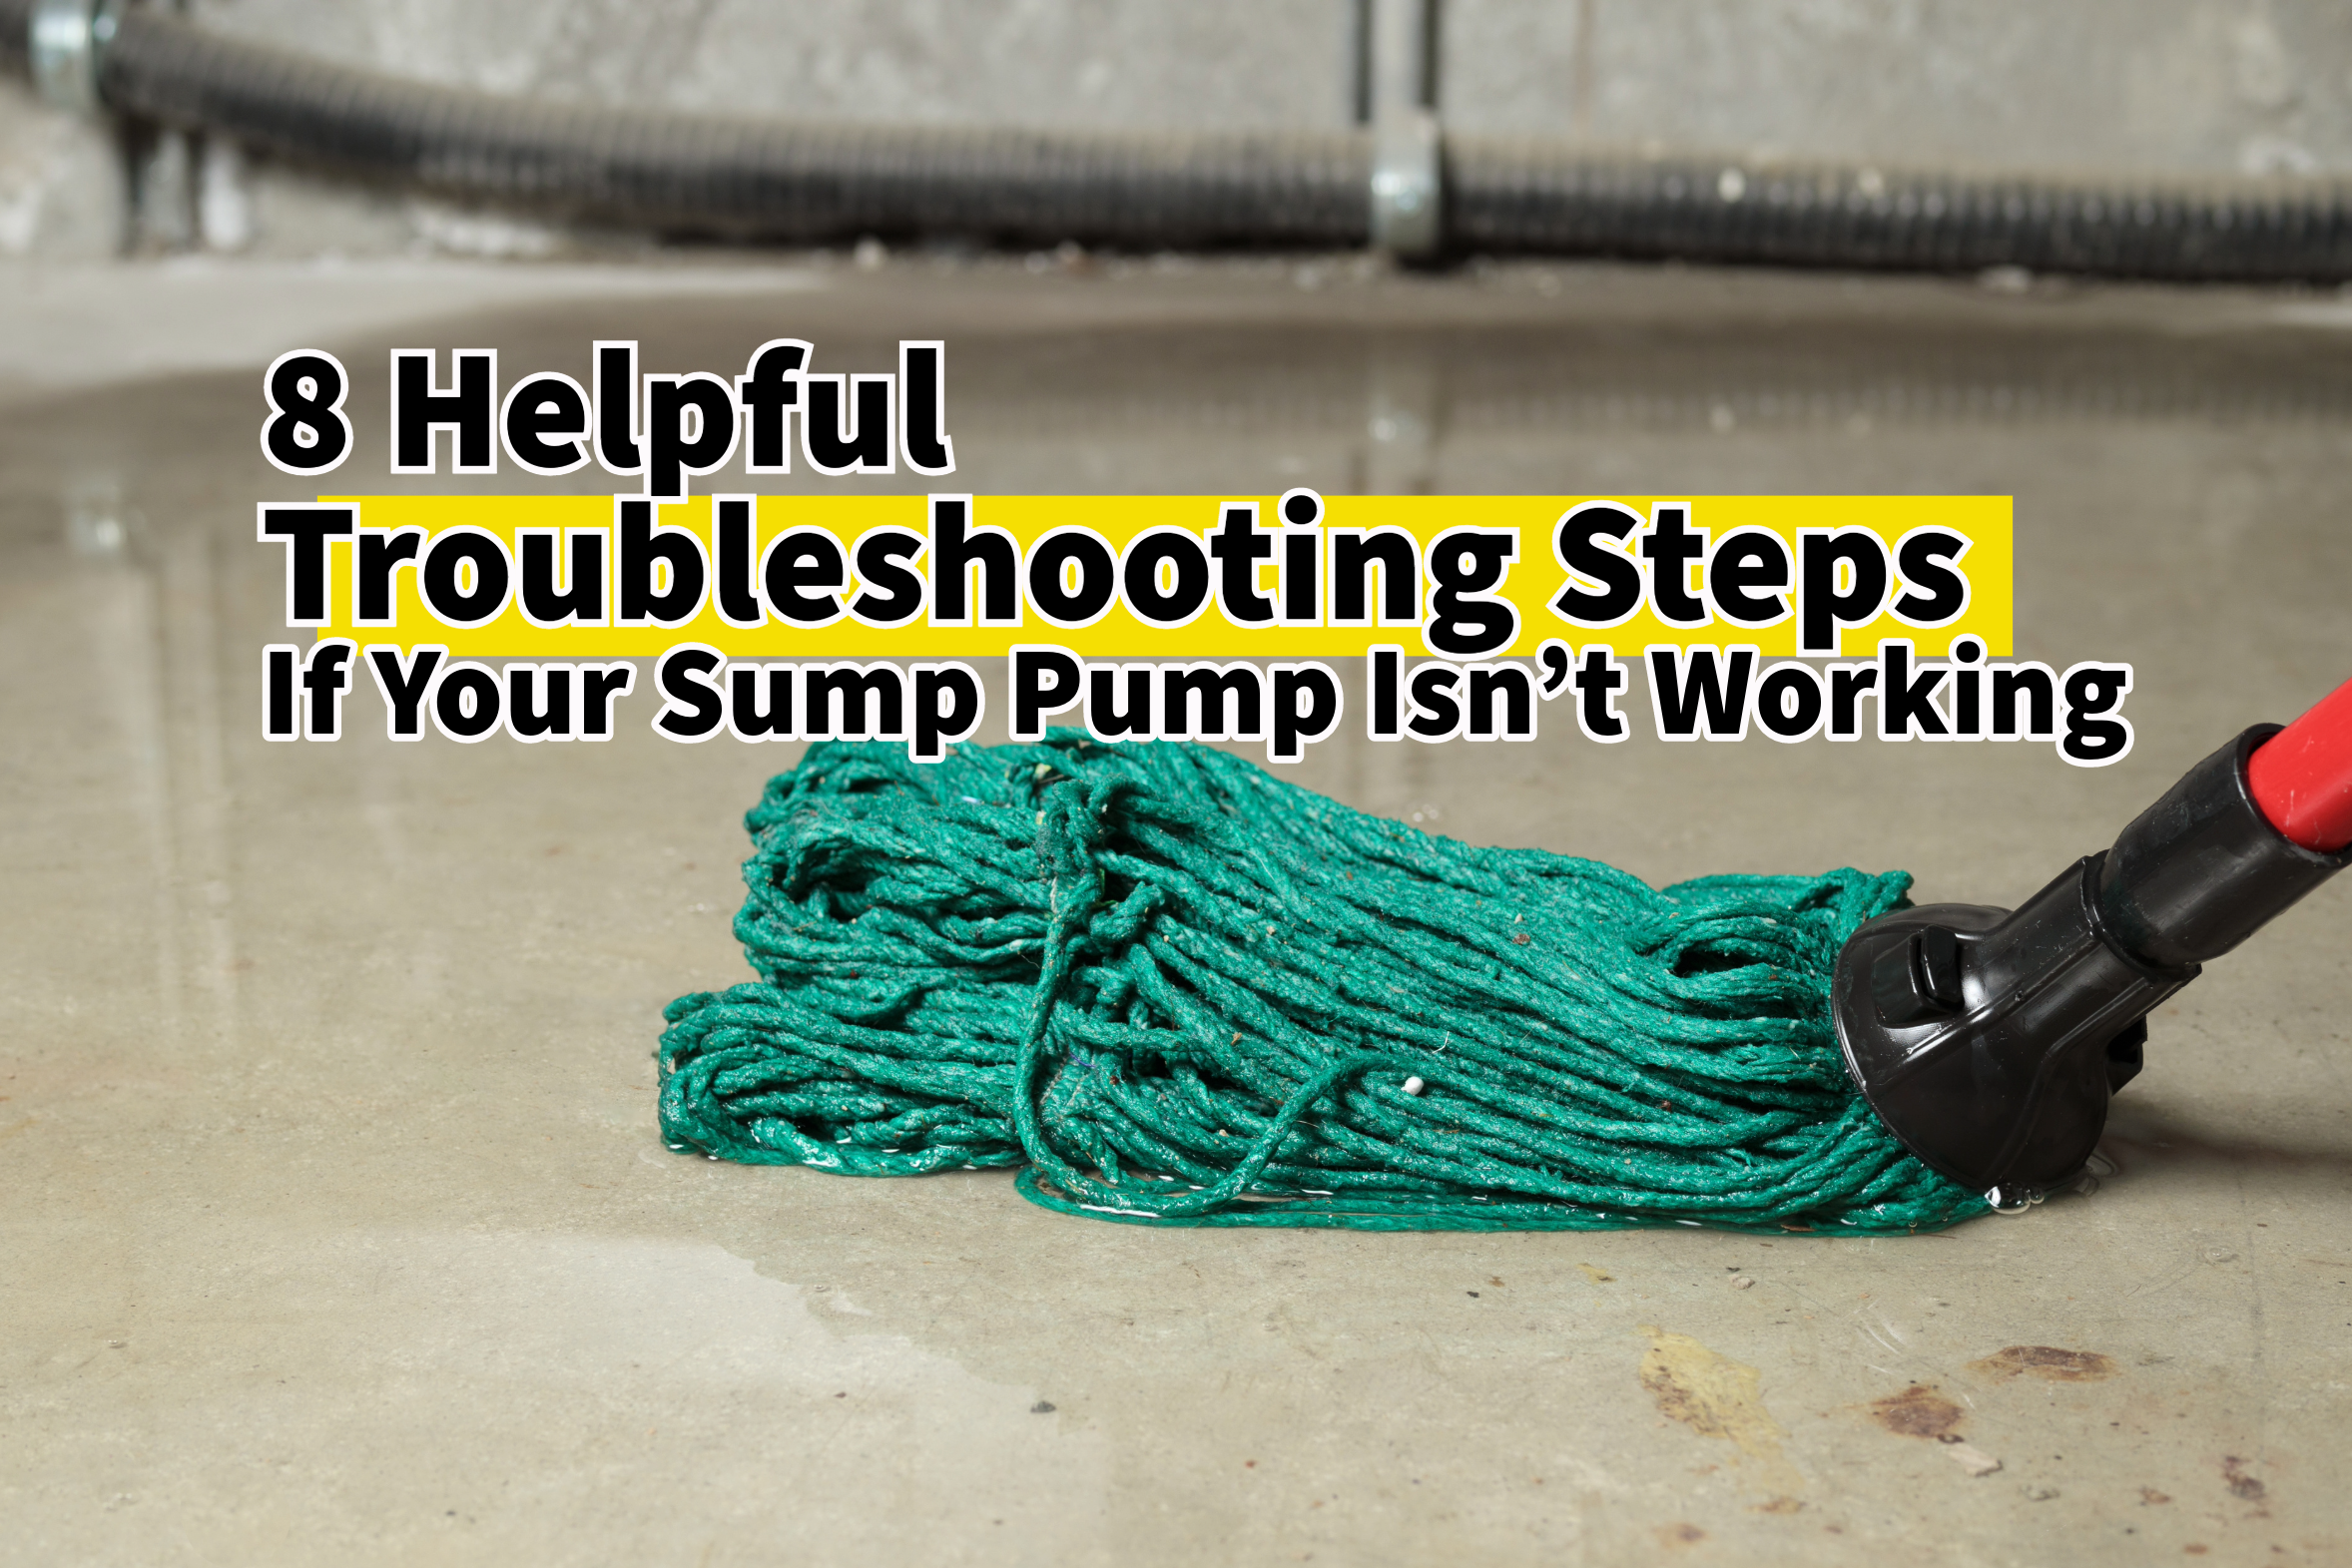 A homeowner’s guide to troubleshooting a malfunctioning sump pump. Plumbing and drain services in Kettering, Ohio.